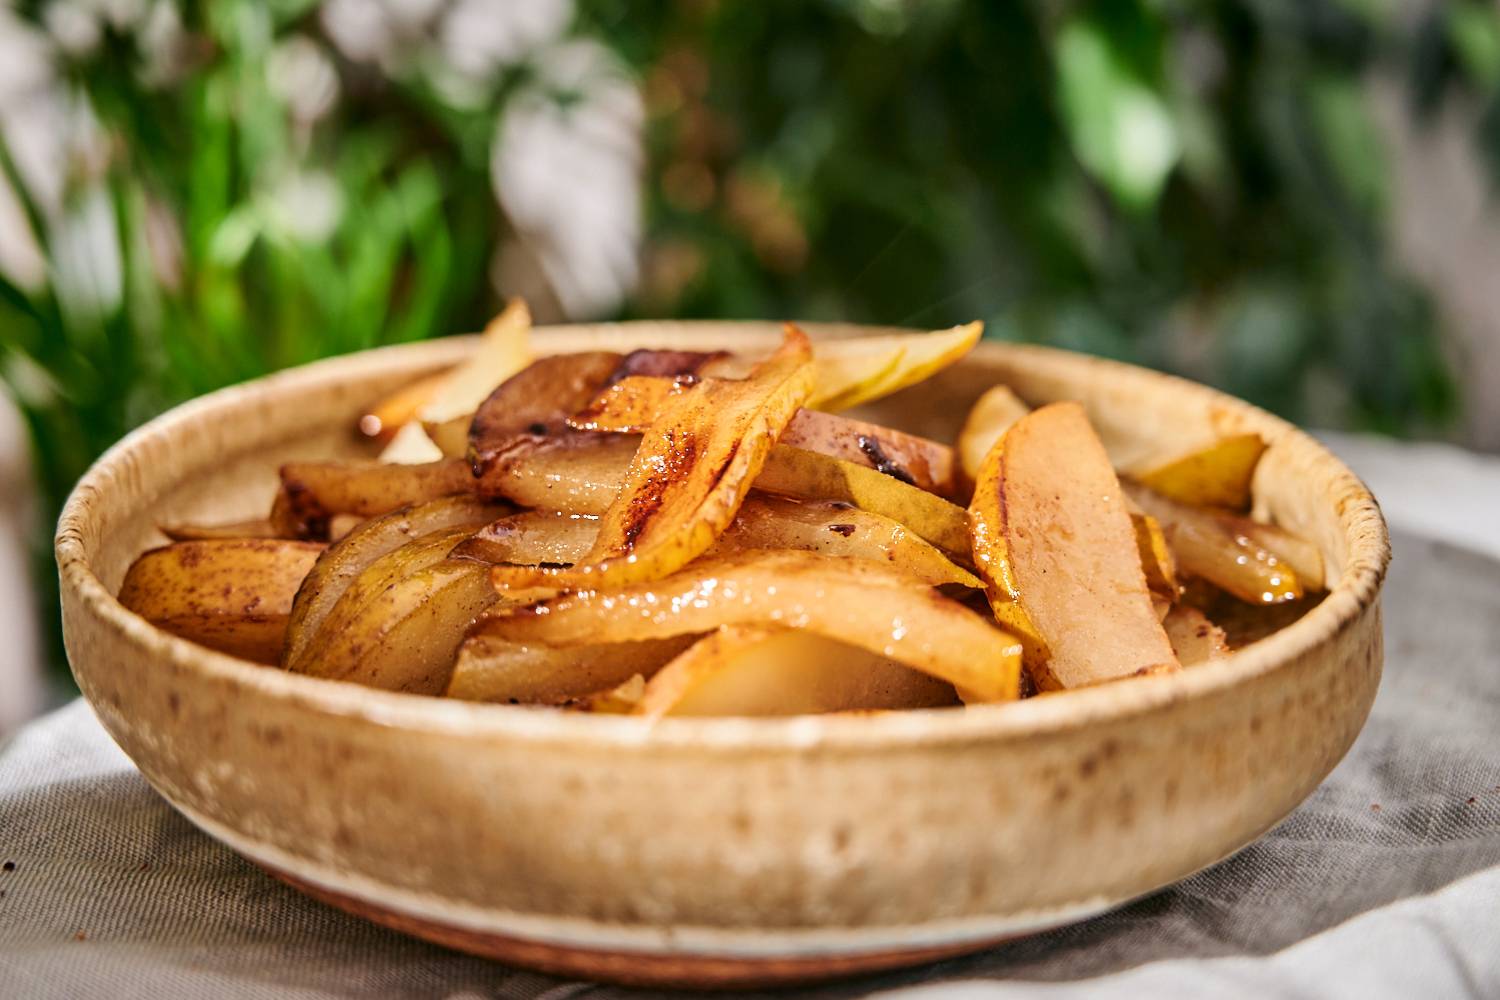 Grilled pears cut into slices with caramelized edges in a white bowl.